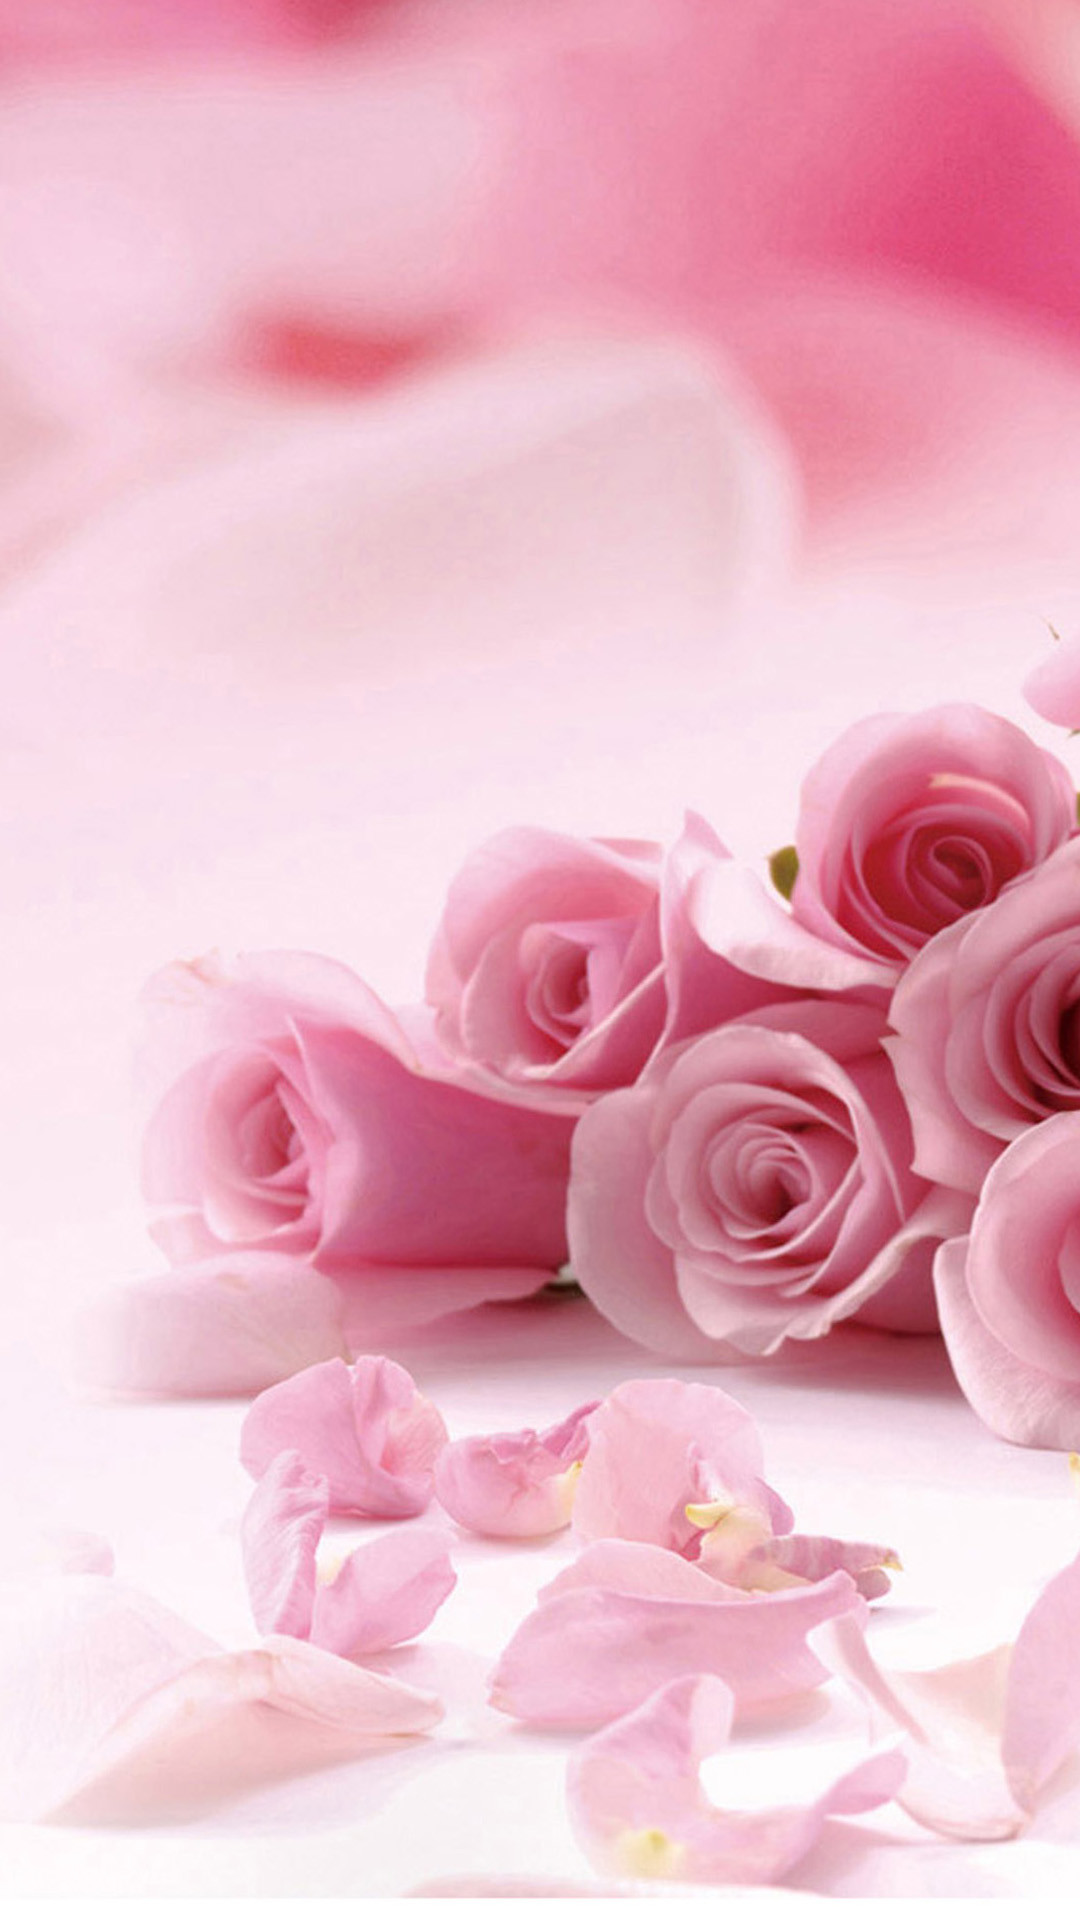 1080x1920 Pink roses iPhone 5 wallpapers, Background and Themes